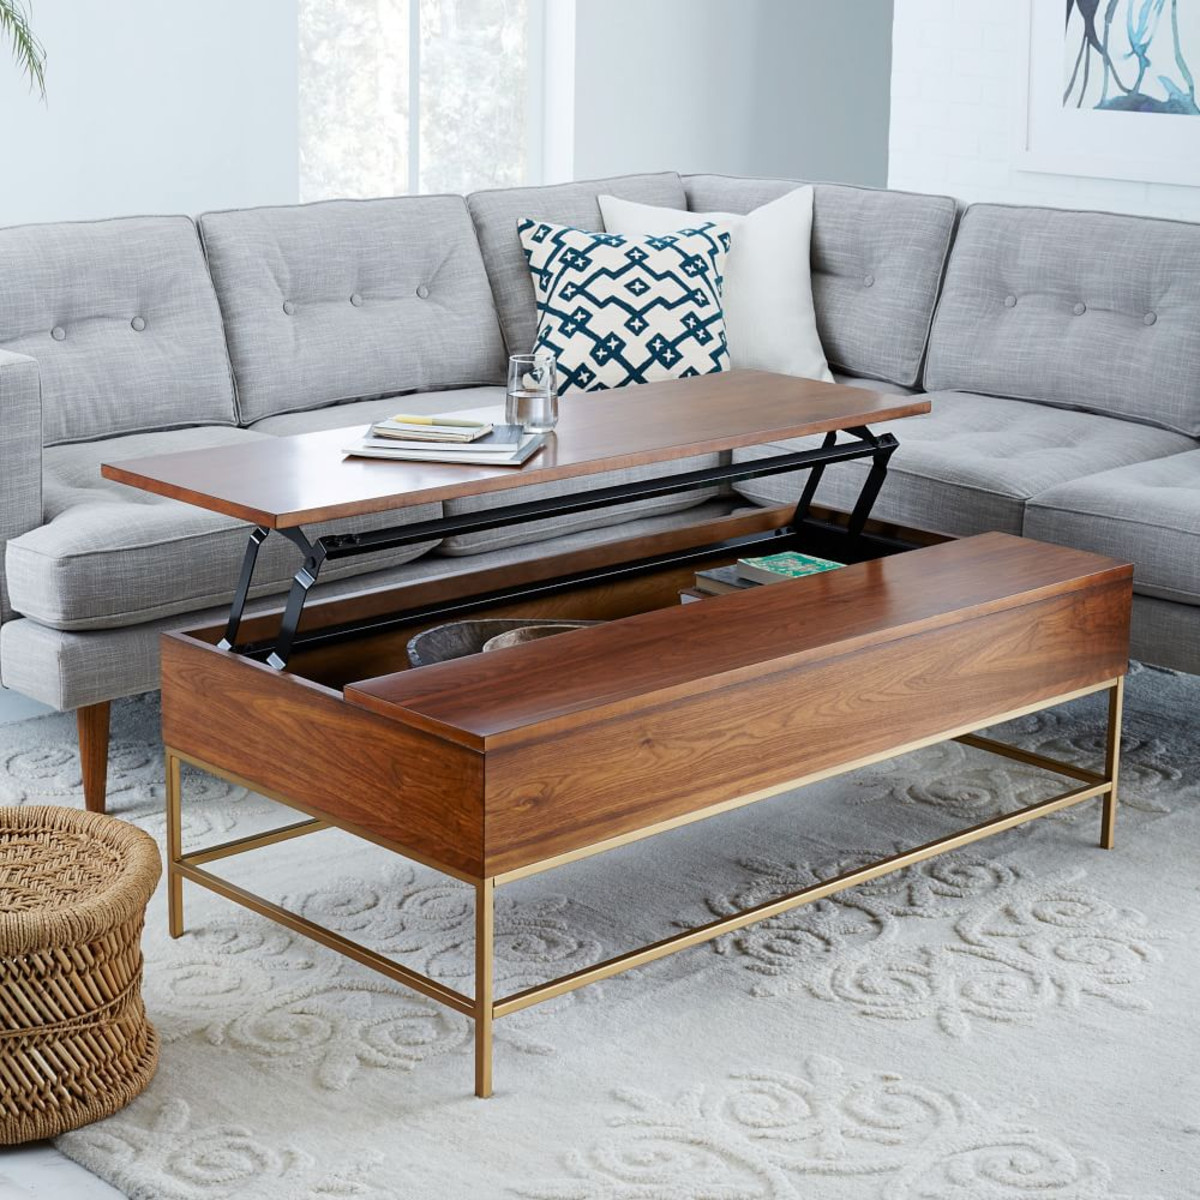 Small Livingroom Table
 8 Best Coffee Tables For Small Spaces